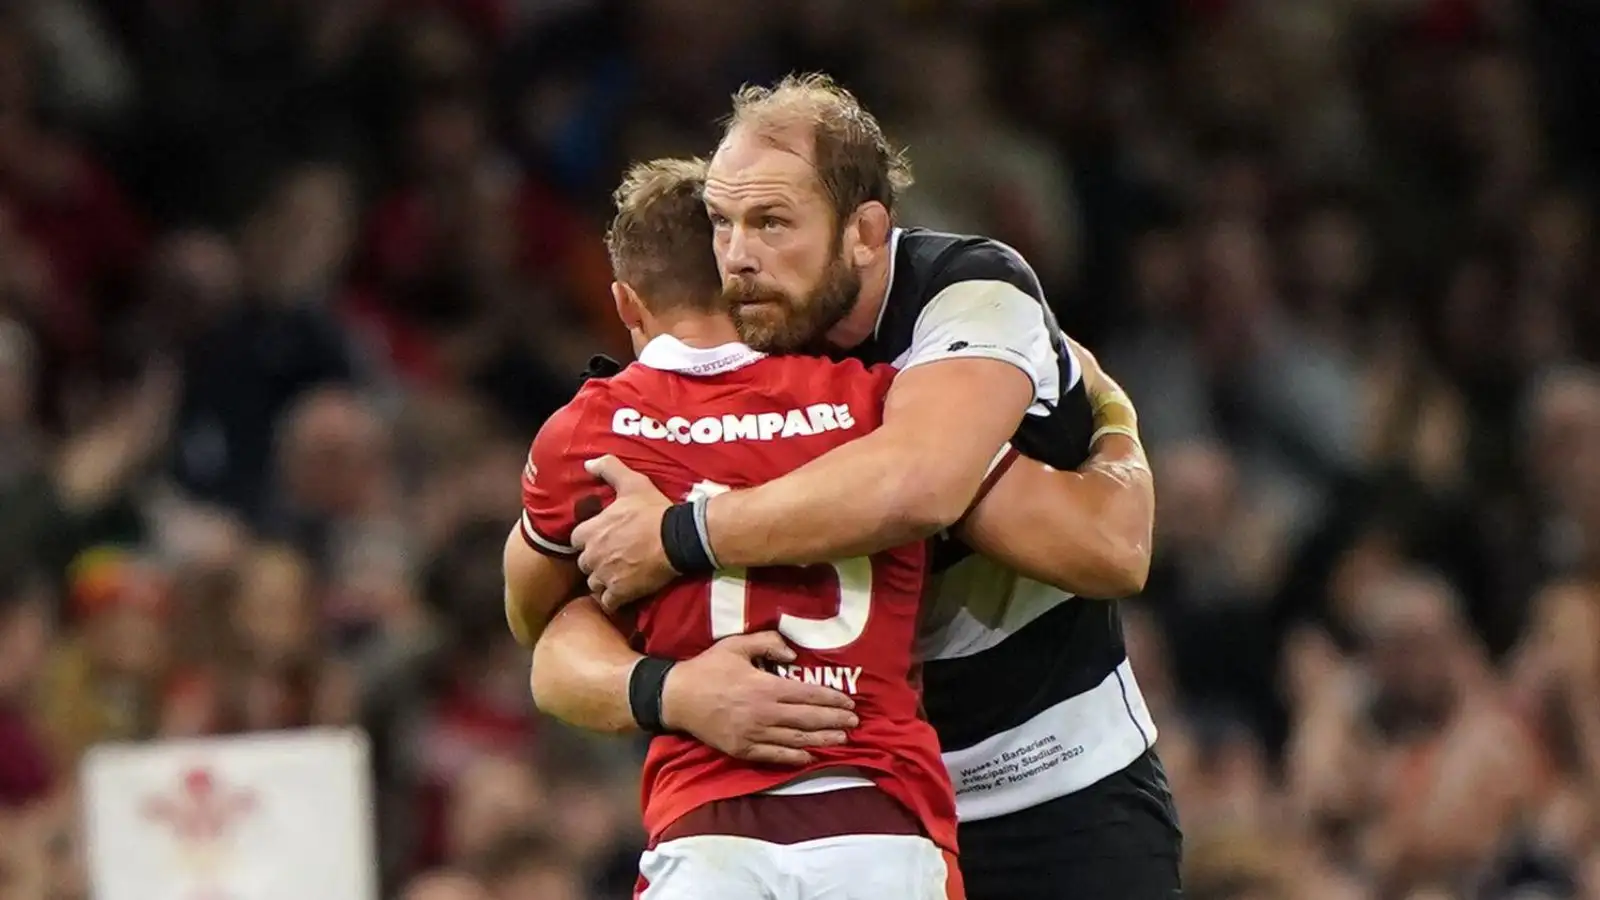 Wales' Leigh Halfpenny hugs Barbarians' Alun Wyn Jones as he is substituted off in his final appearance for the country during the Autumn International match at the Principality Stadium